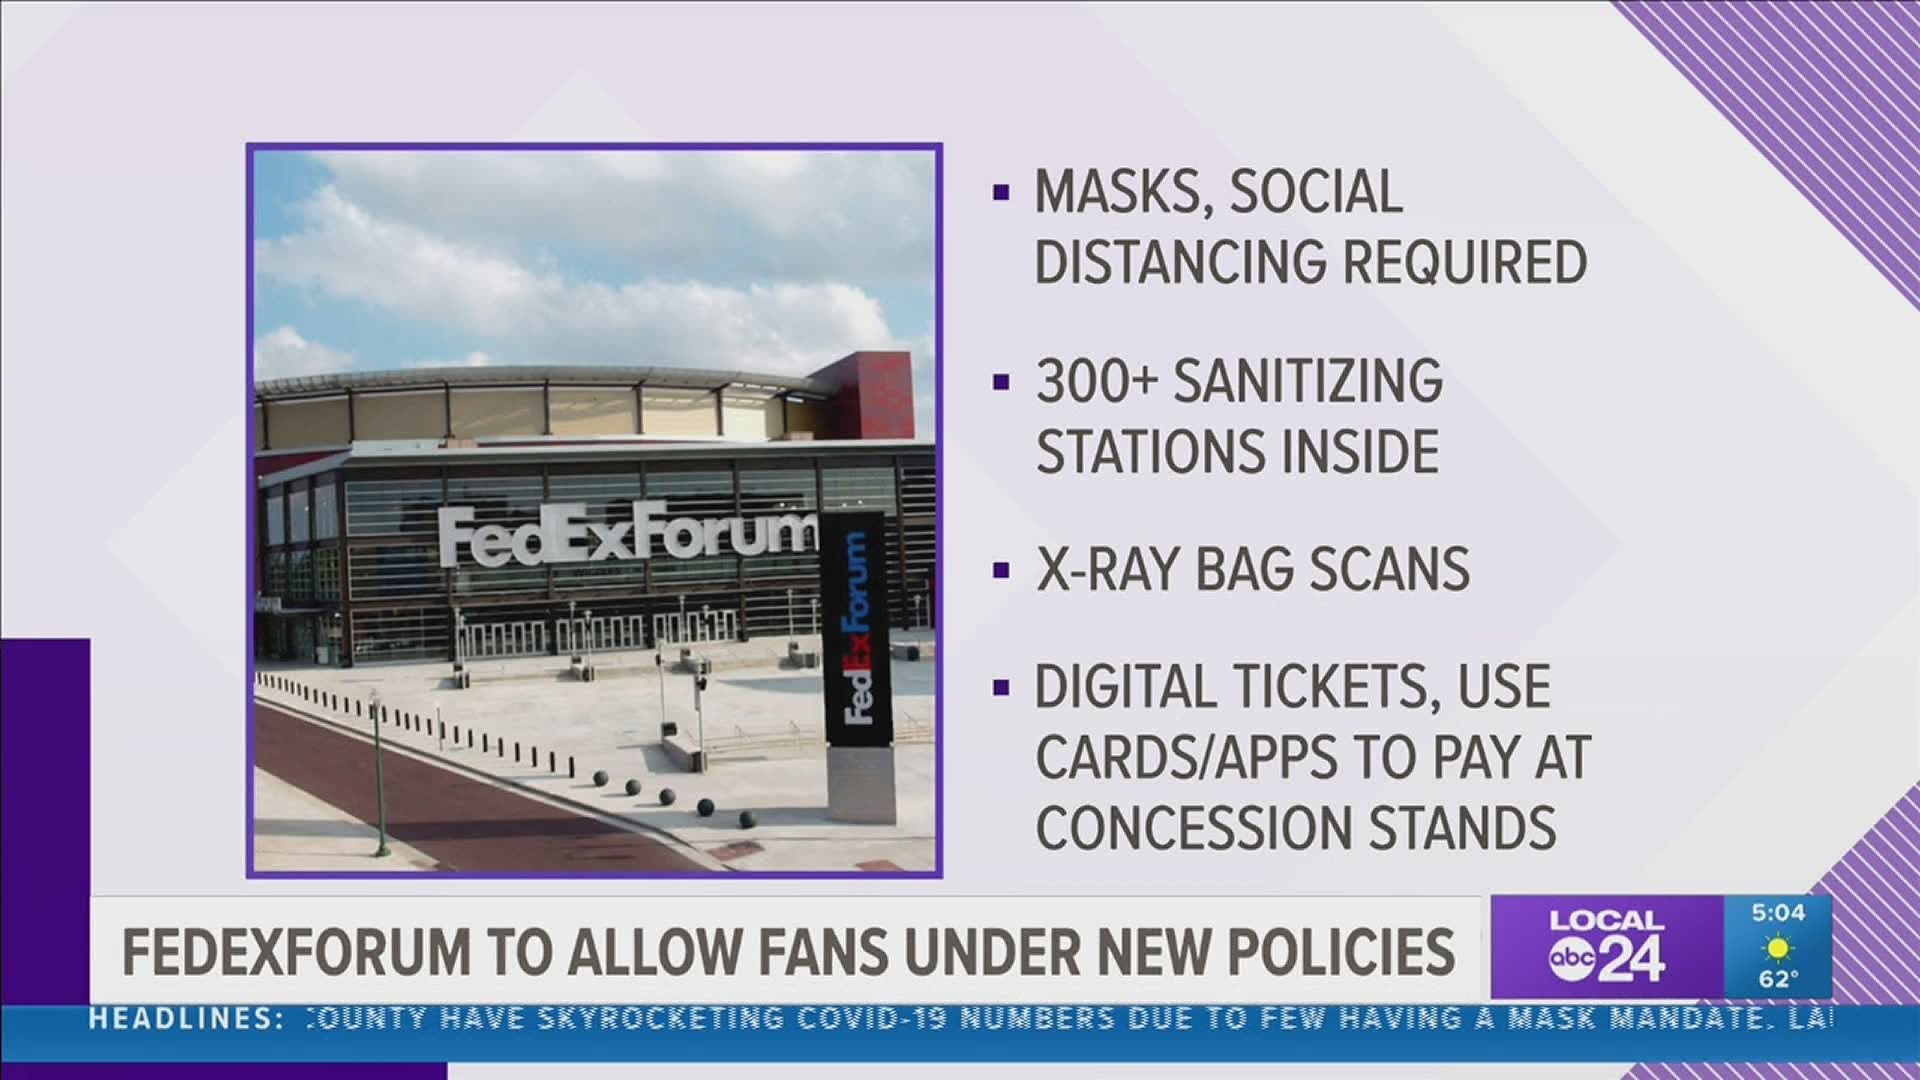 The policies affect all events at FedExForum, including Memphis Grizzlies games, Memphis Tigers men’s basketball games, concerts and other shows.